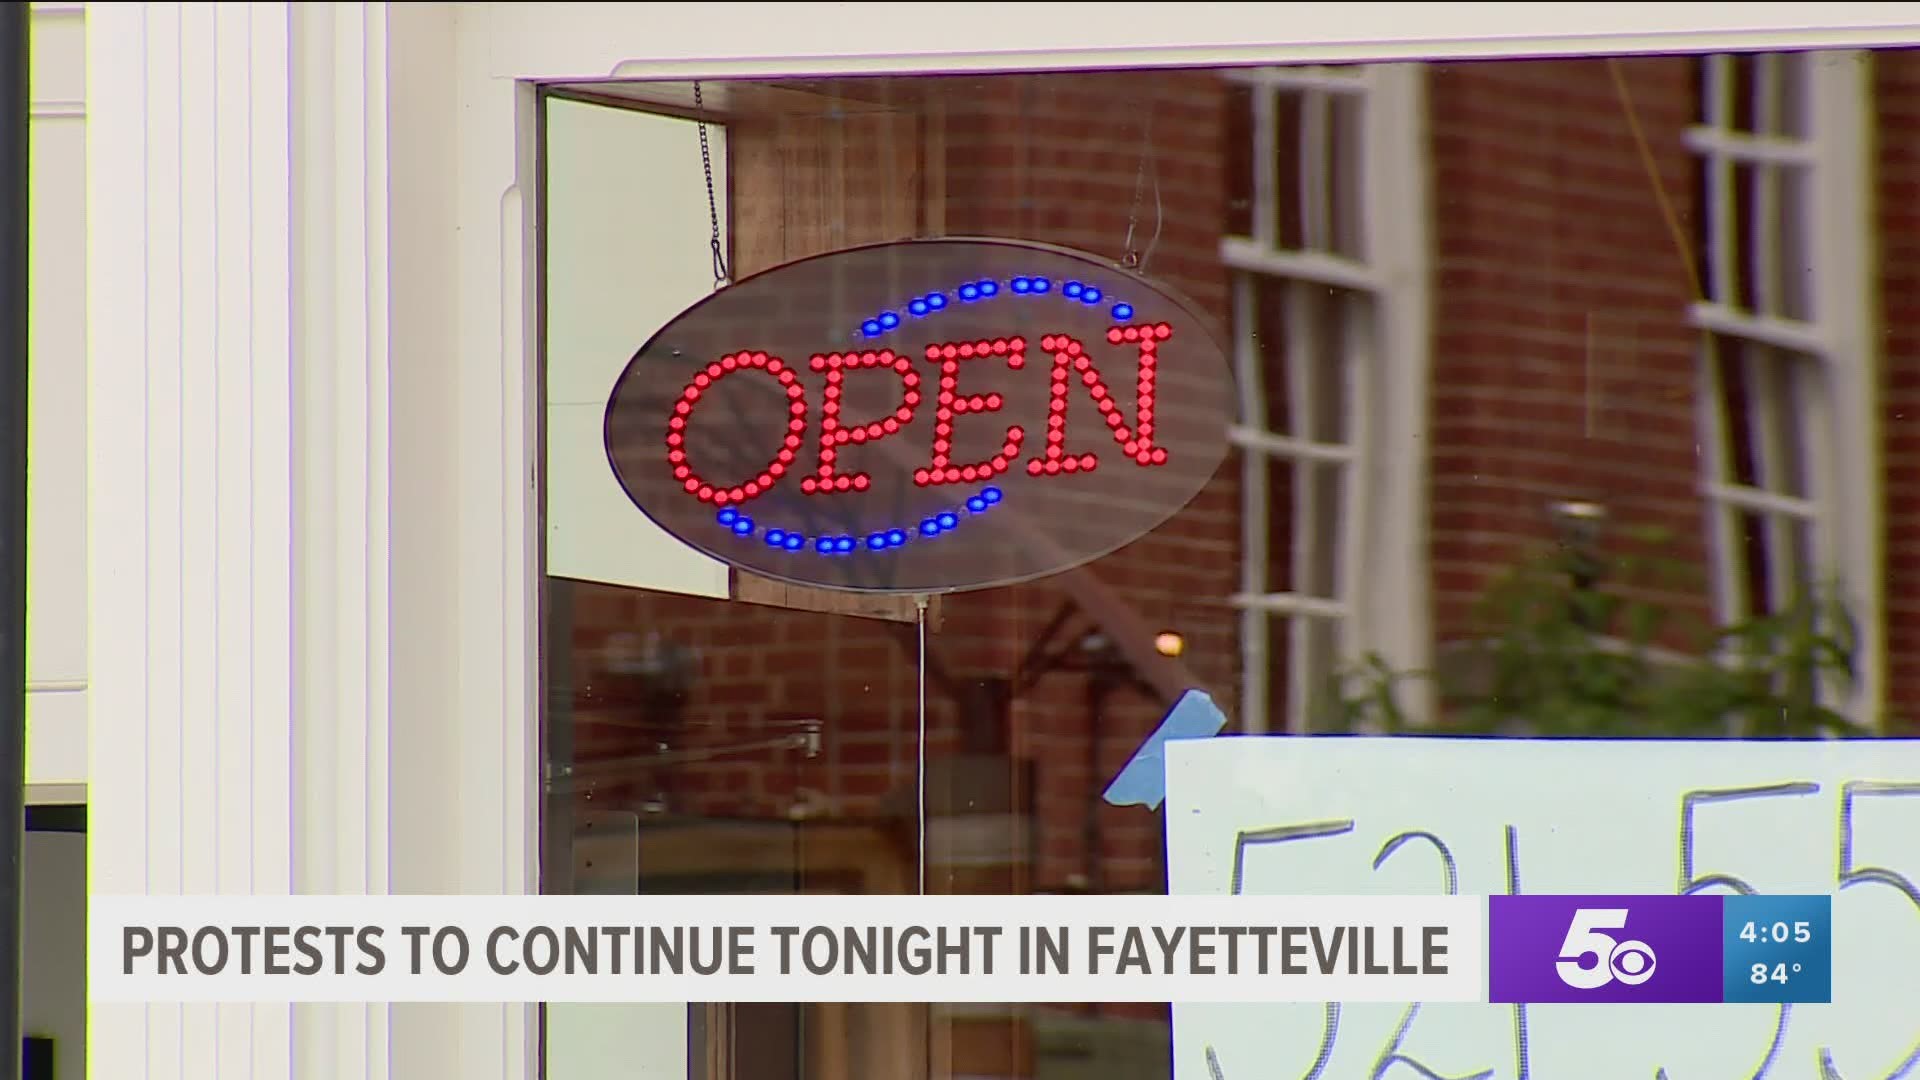 Protests to continue tonight in Fayetteville